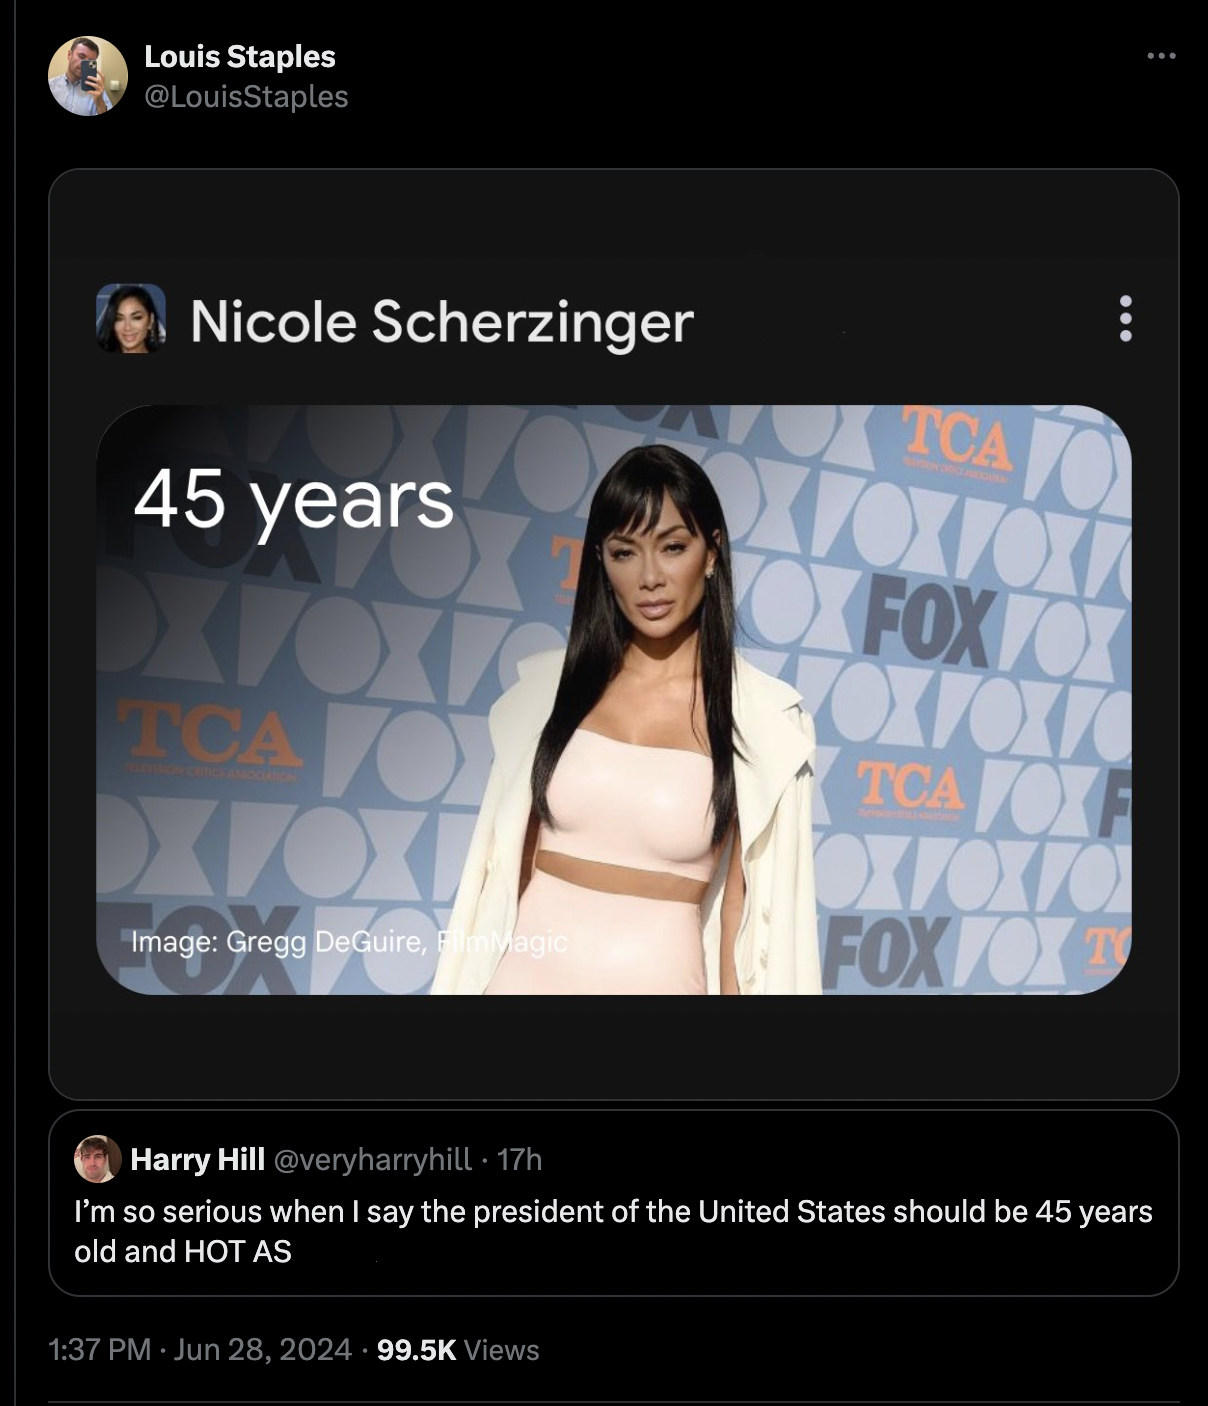 screenshot - Louis Staples Nicole Scherzinger 45 years Tcao Oxfoxt Image Gregg DeGuire, Tcao Xfoxfox Oxfox Fox Tca Foxf Oxfoxto Fox Fox Harry Hill 17h I'm so serious when I say the president of the United States should be 45 years old and Hot As Views